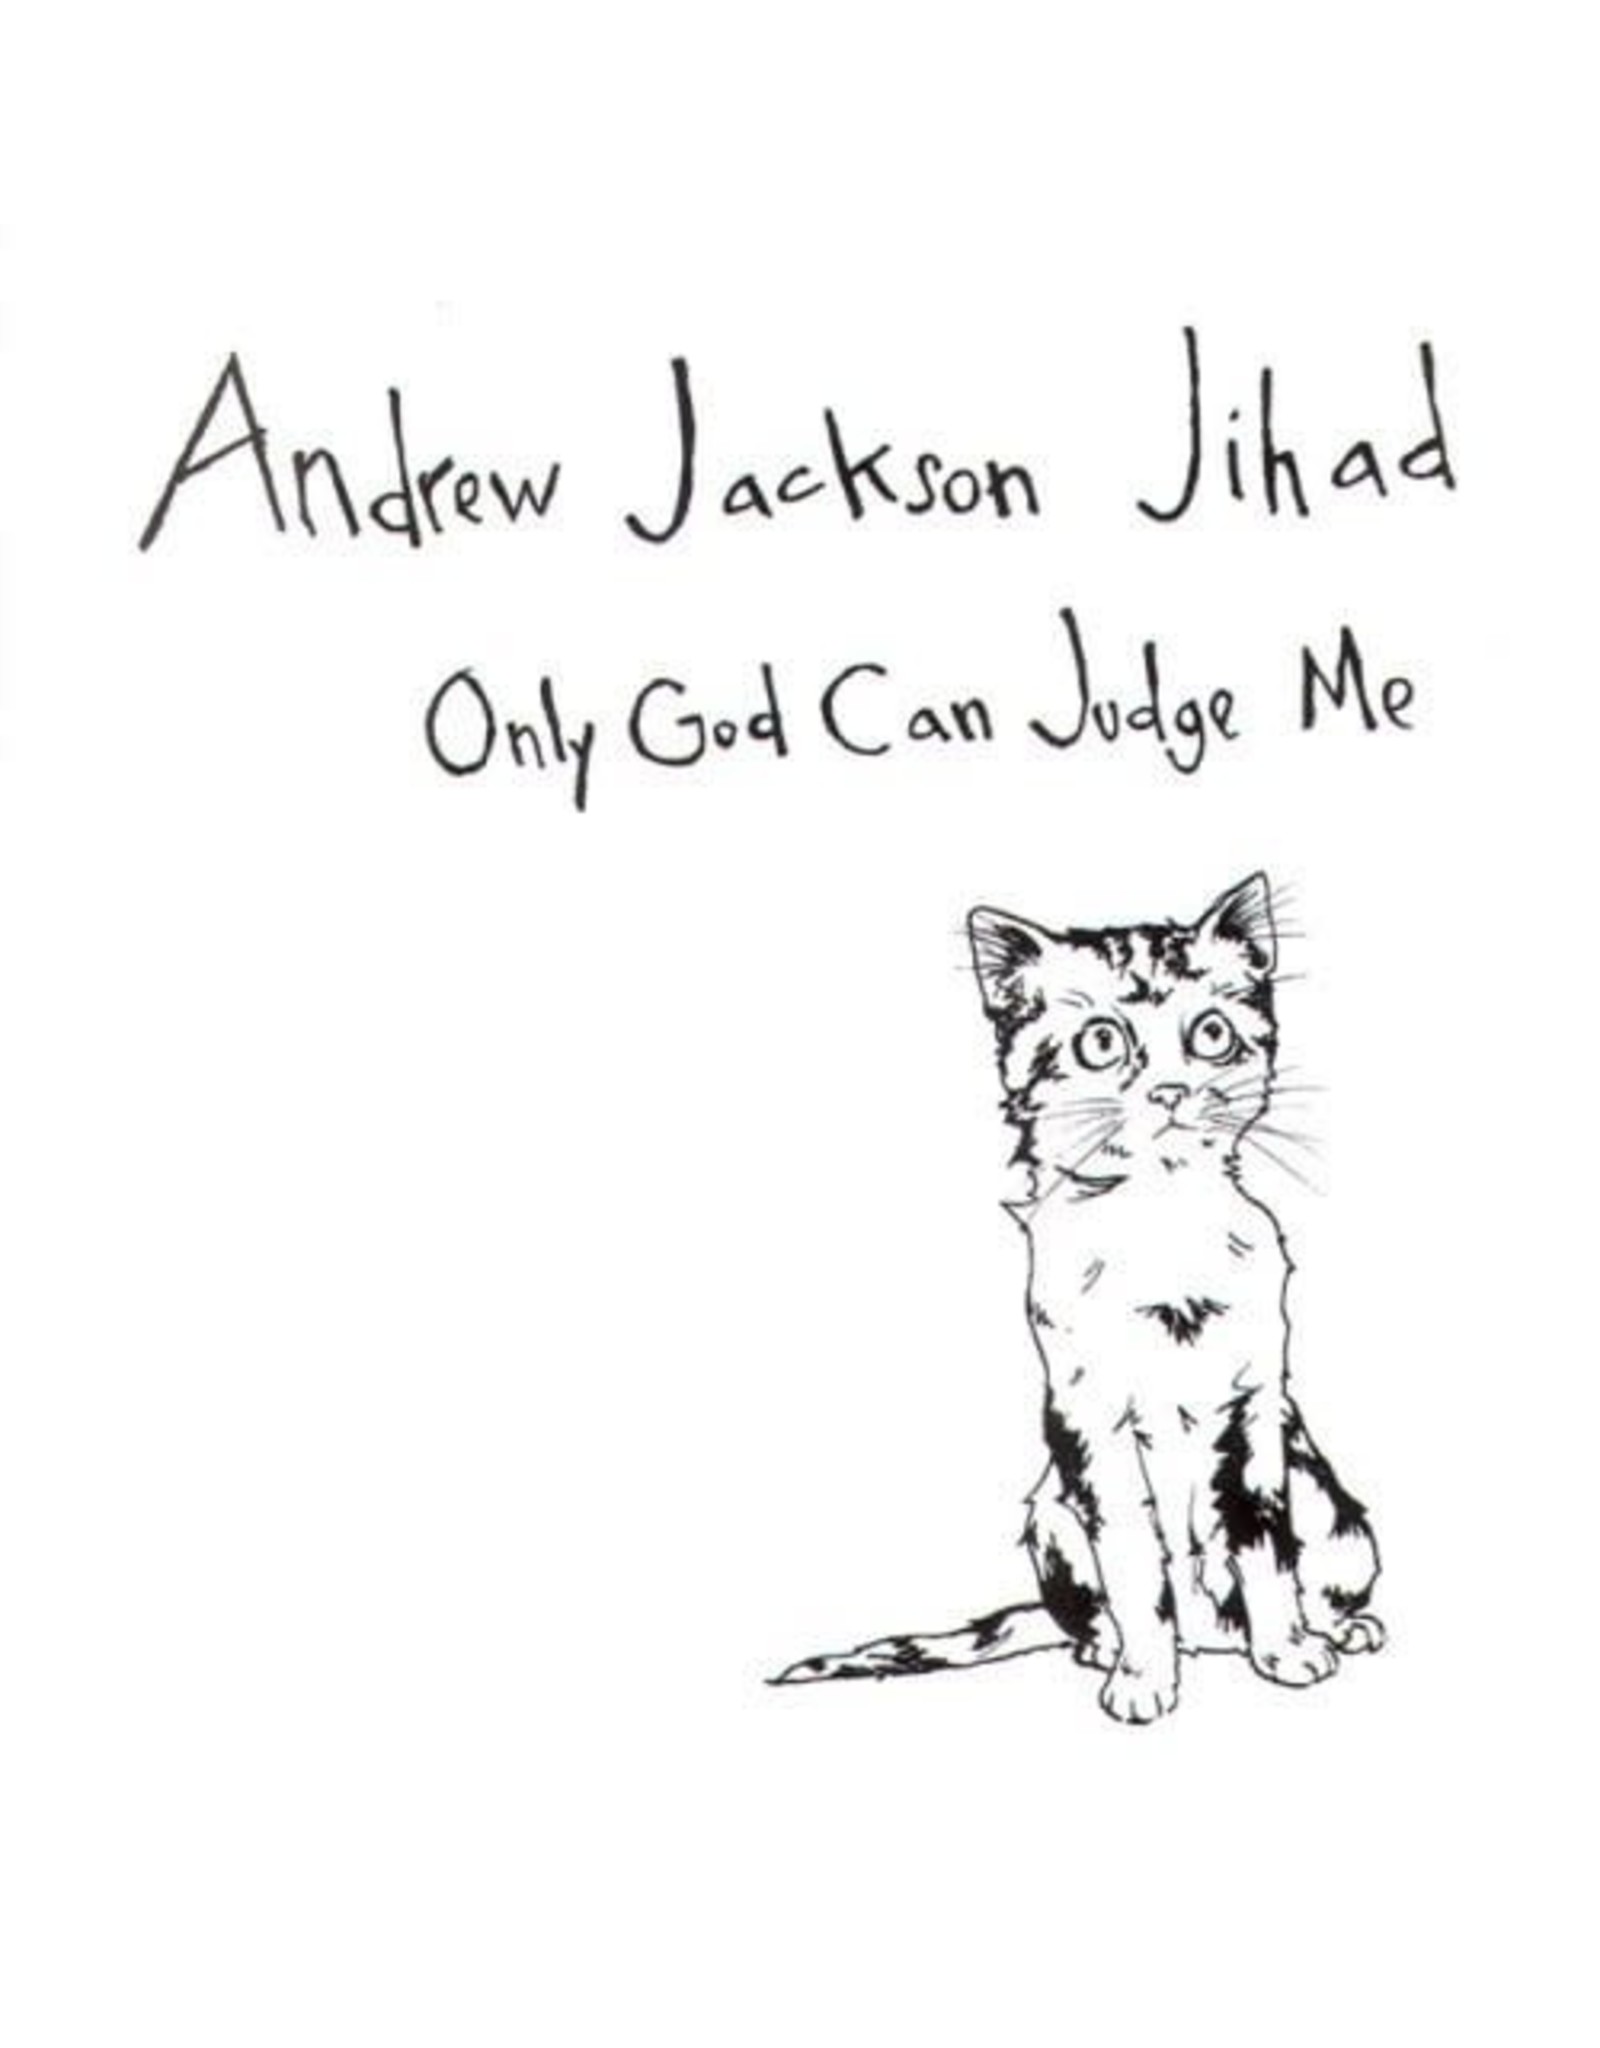 AJJ - Only God Can Judge Me LP